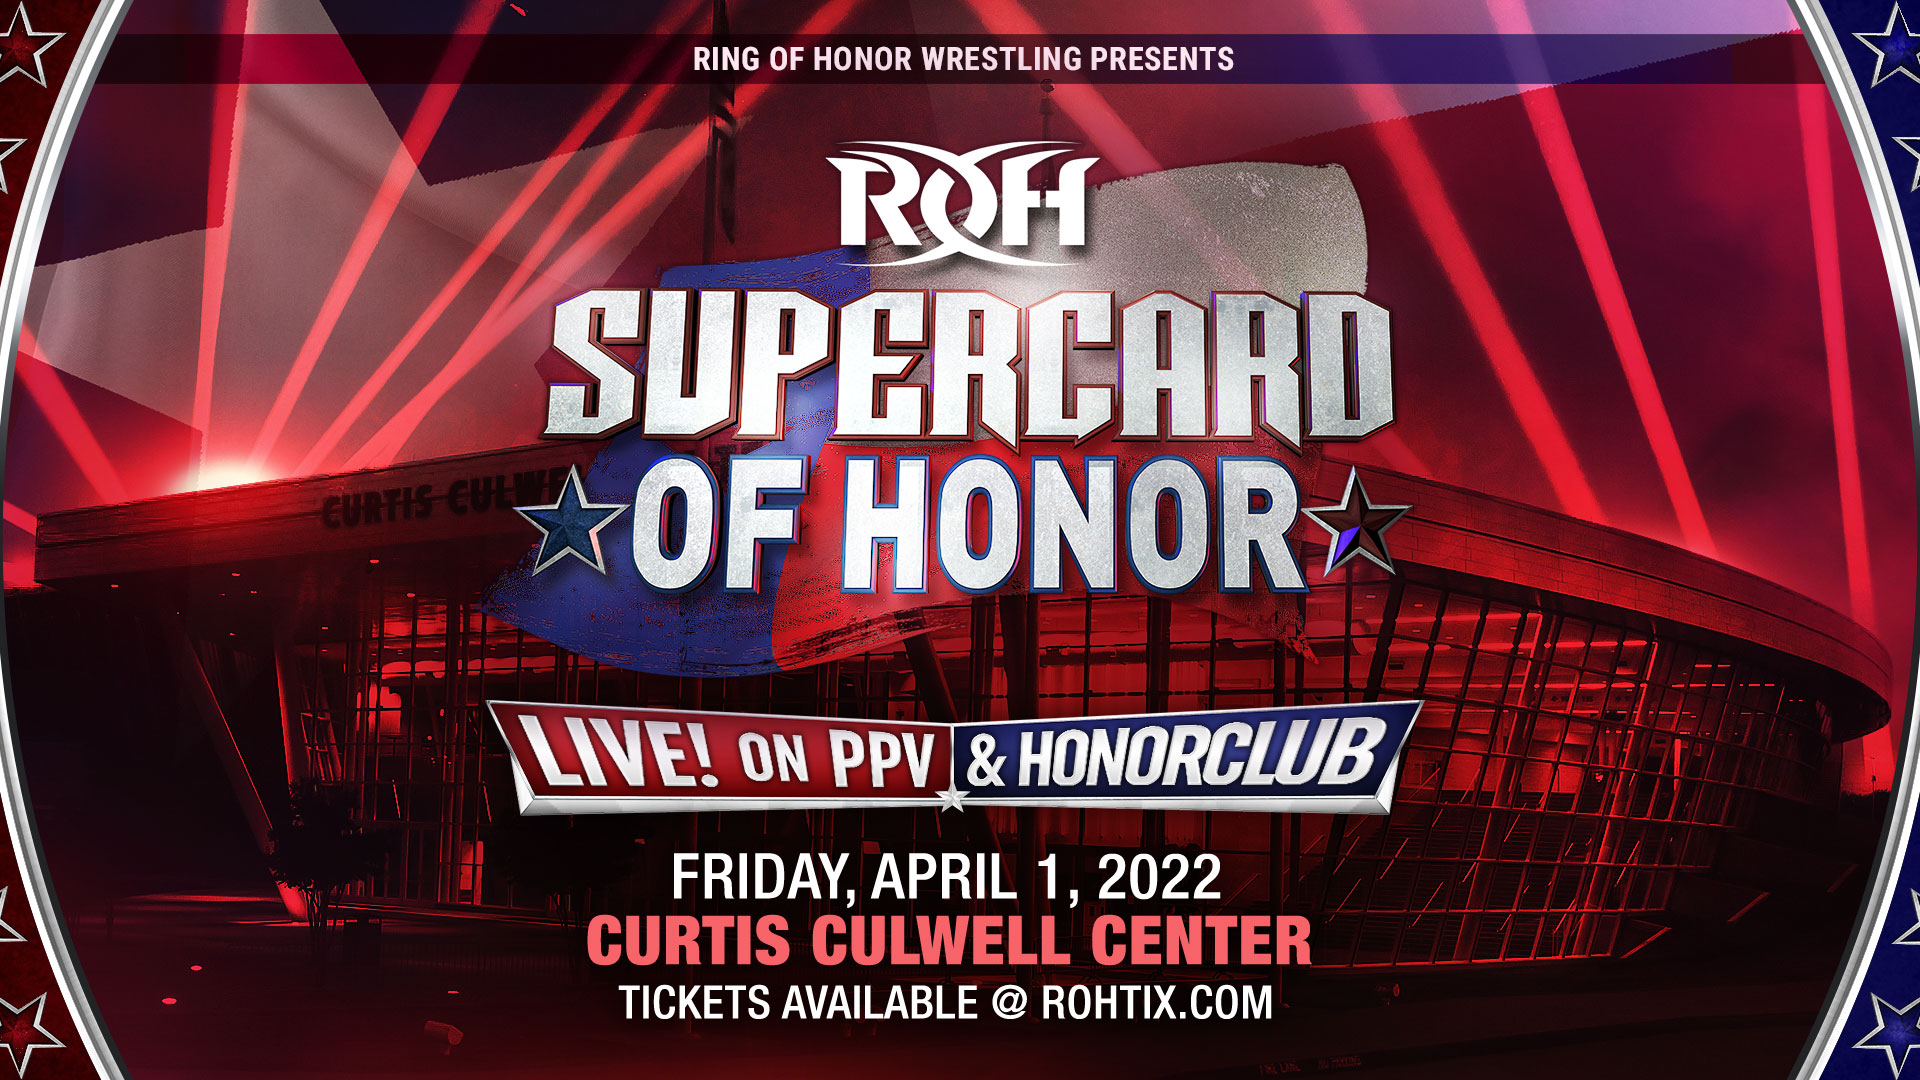 Updated Lineup For ROH Supercard Of Honor This Friday